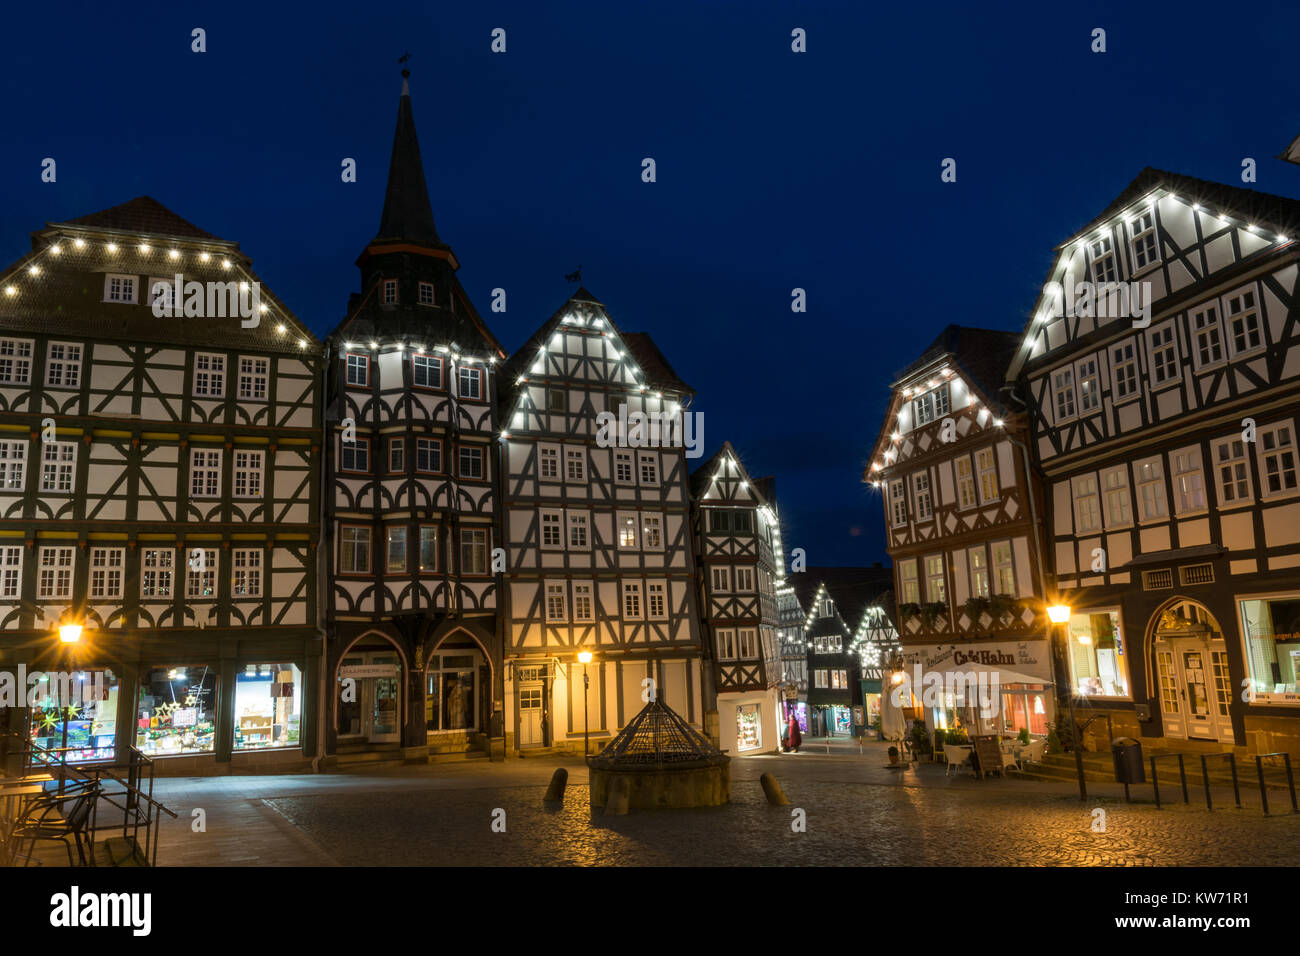 FRITZLAR, GERMANY: 25th December 2017: The marketplace of Fritzlar with fountain and fairy lights during blue hour Stock Photo